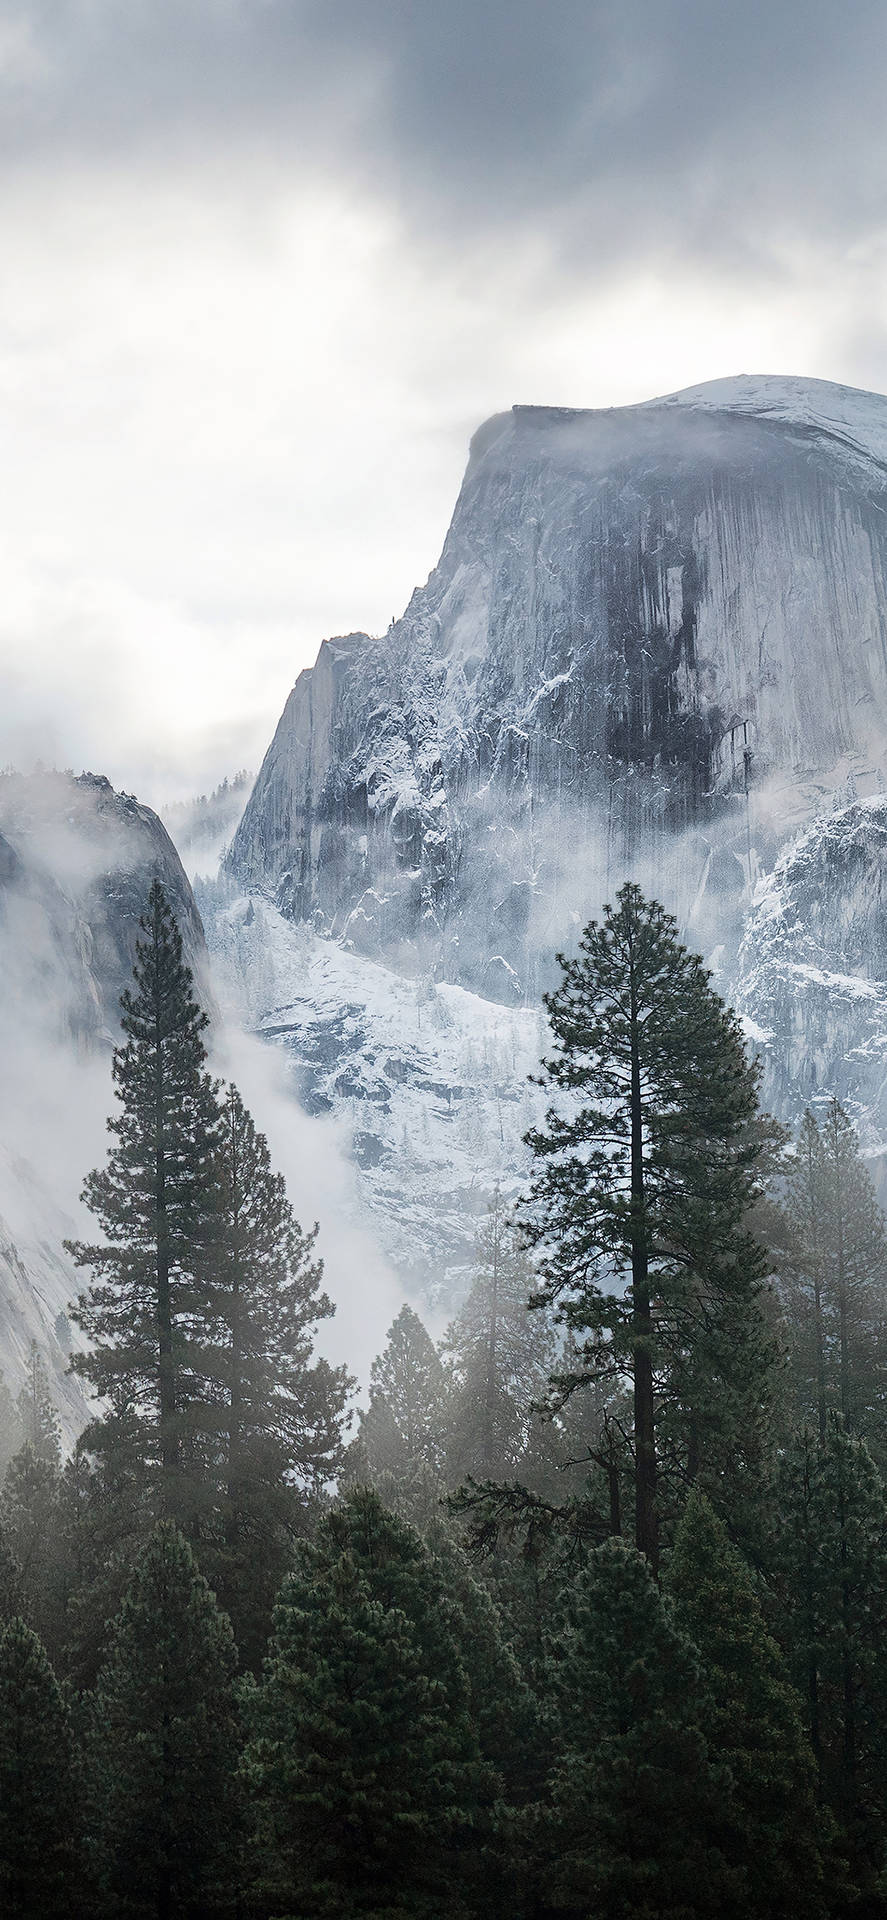 Enjoy the beauty and wonders of Yosemite from your iPhone Wallpaper